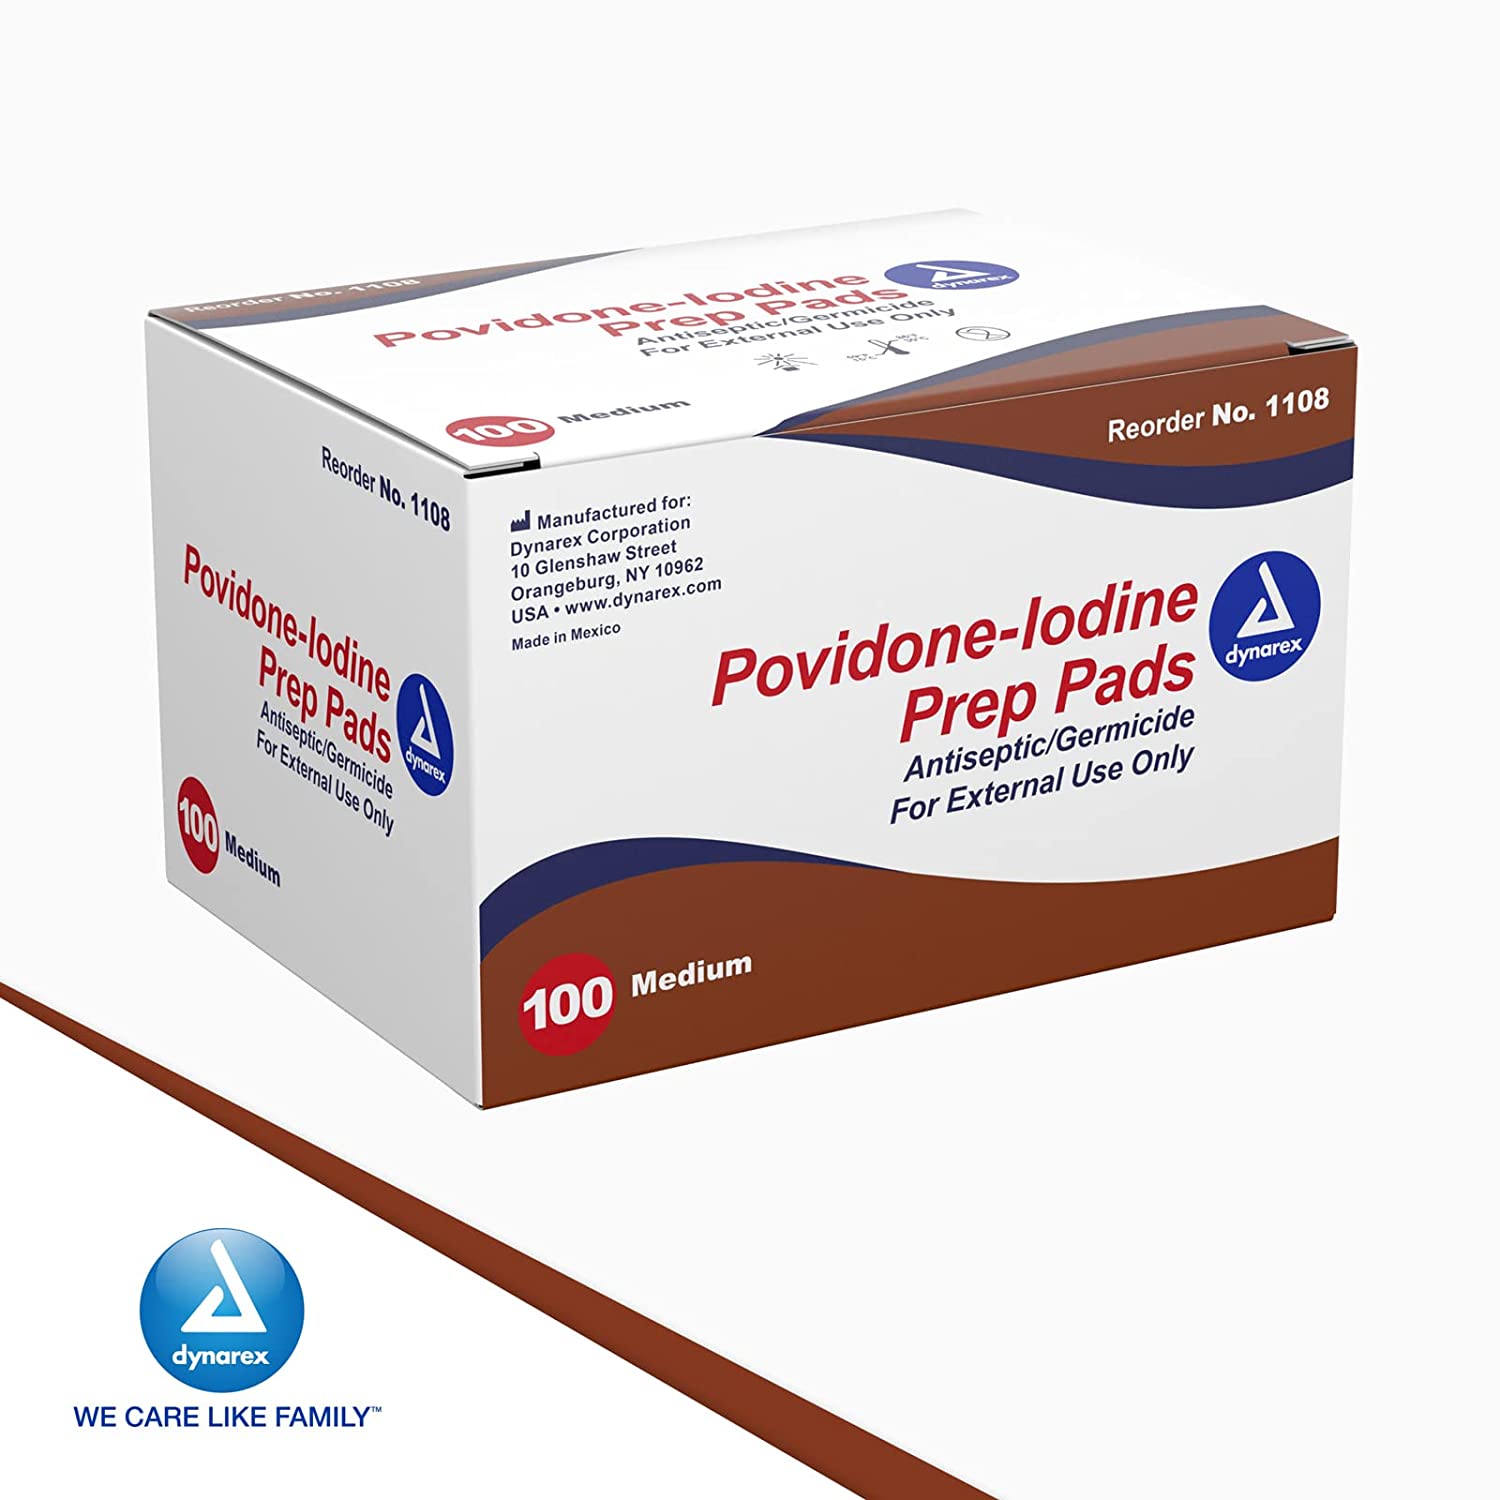 Dynarex Povidone-Iodine Prep Pads, Saturated with Povidone Iodine 10%, Medical-Grade Antiseptic Wipes Used for Prepping Prior Minor Procedures, Medium, 1 Case of 100 Prep Pads